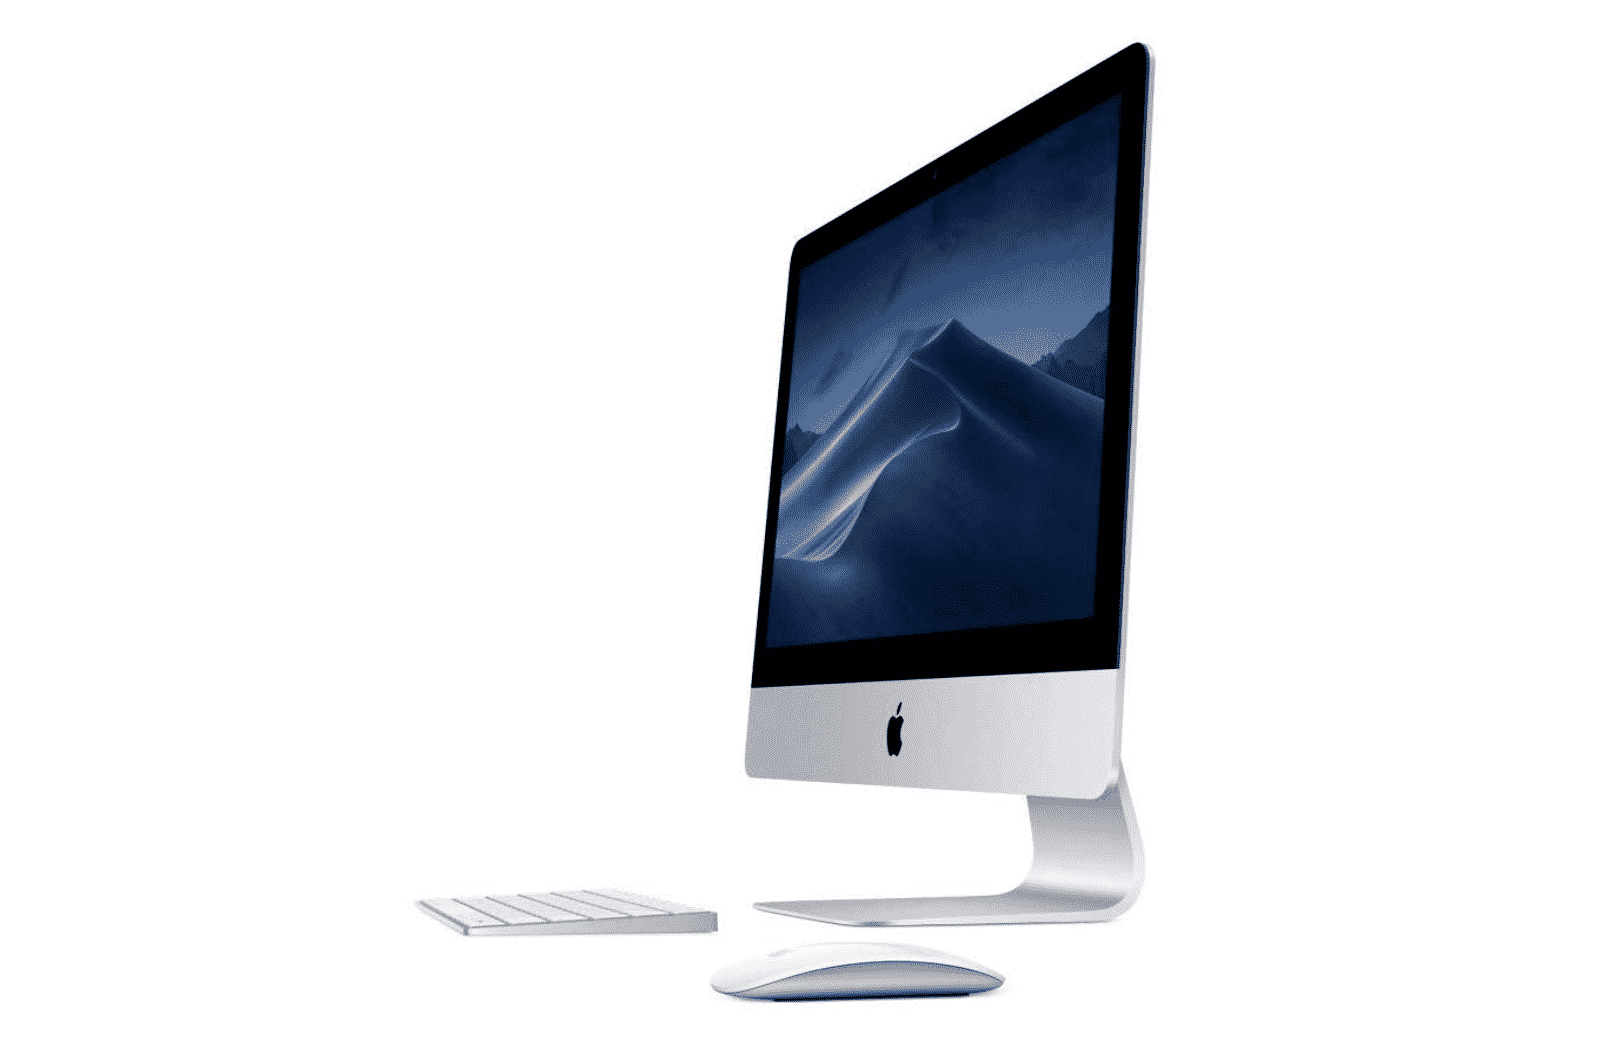 The 21 inch iMac is Now Only $950